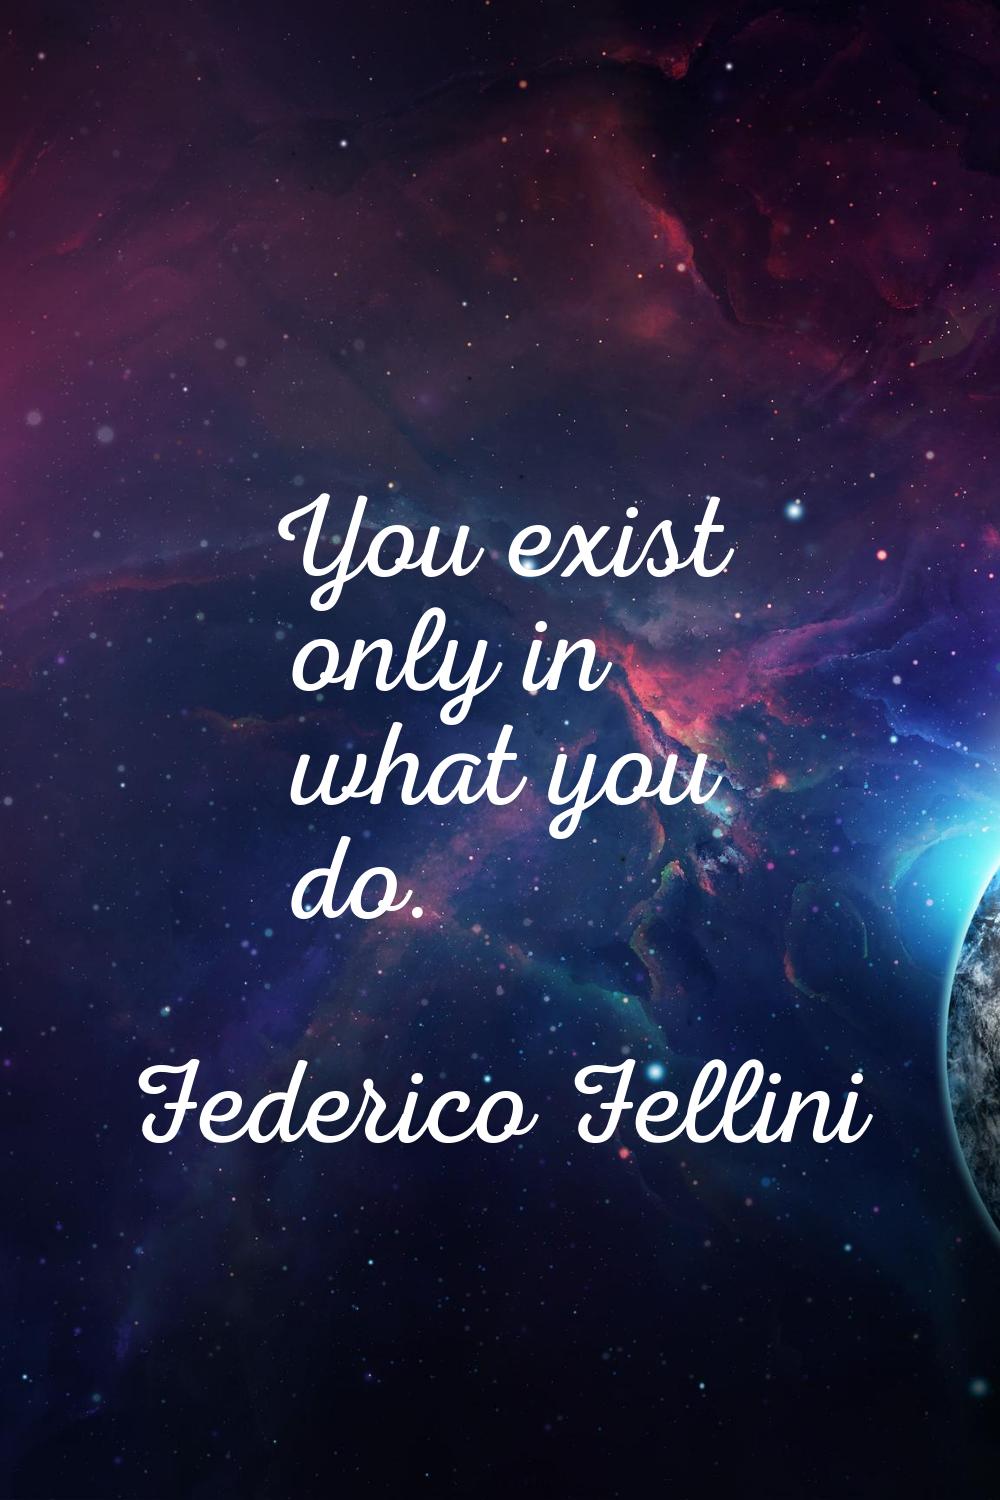 You exist only in what you do.